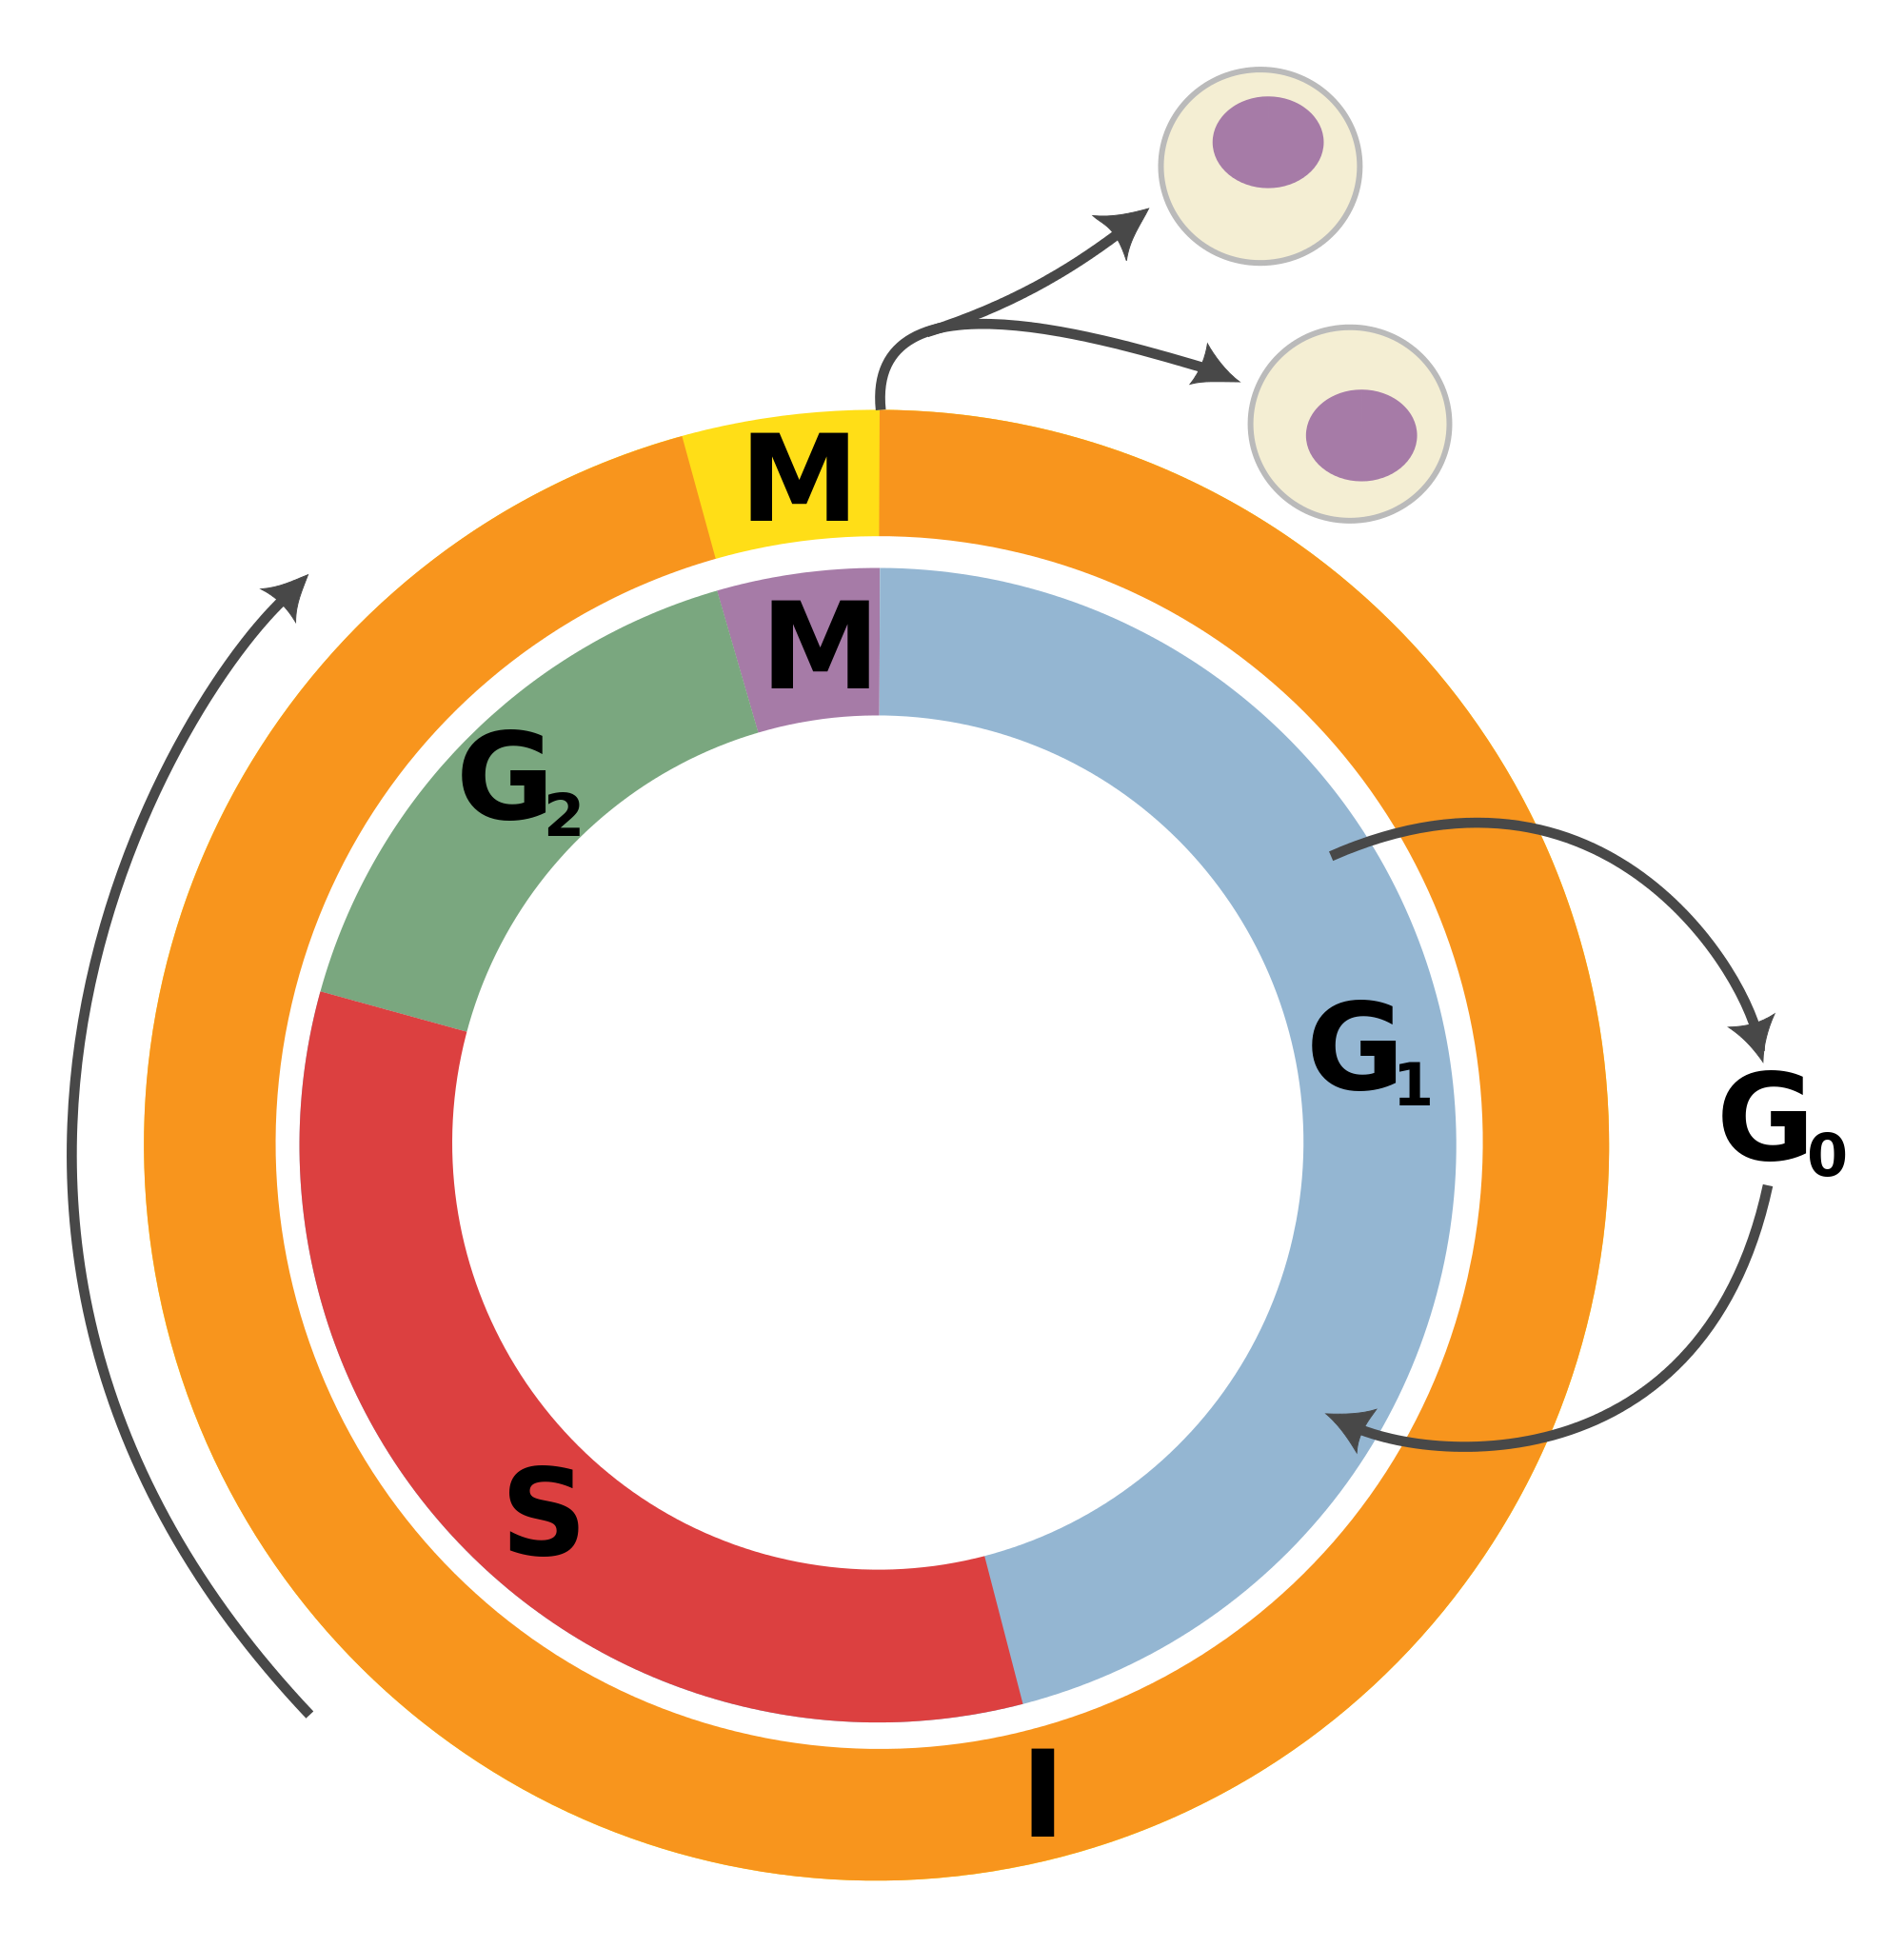 G1 Phase G2 Phase Cell Cycle Mitosis Interphase Png Clipart - Vrogue